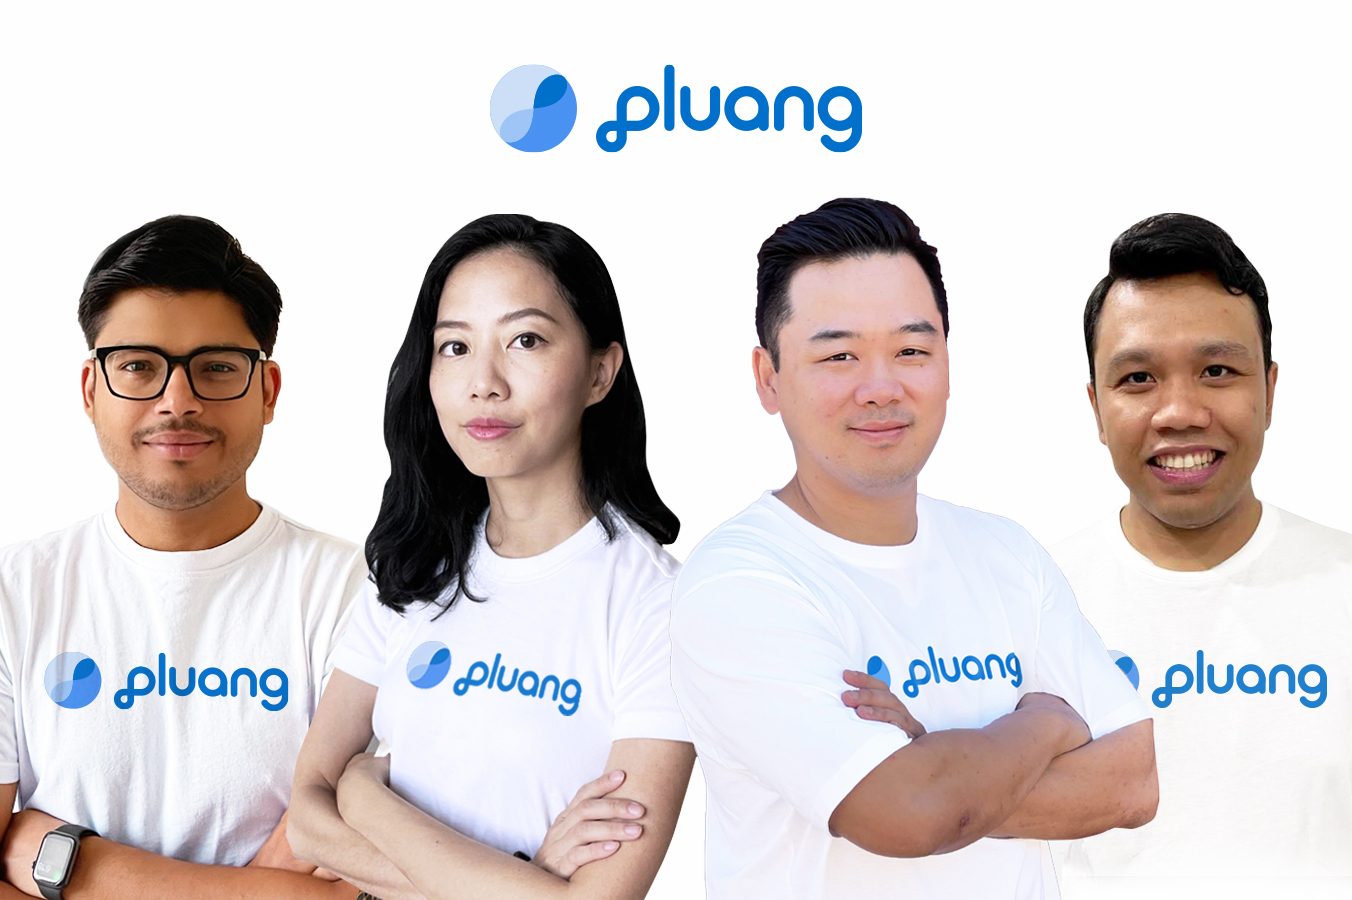 Indonesia's investing platform Pluang raises $55m led by Accel